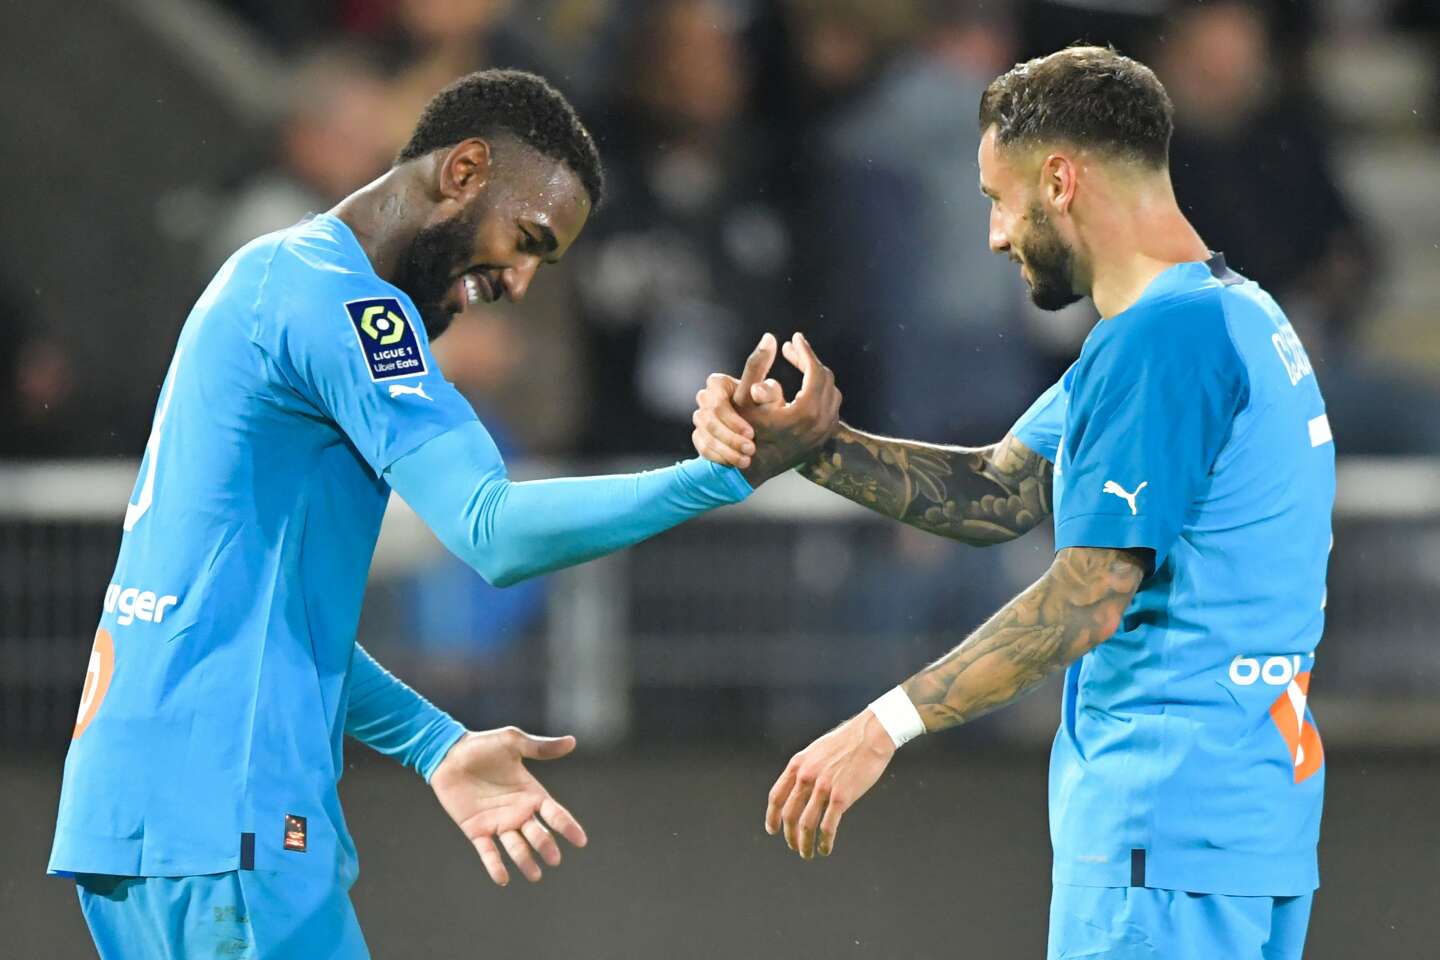 Ligue 1 : Marseille assomme Angers (3-0)